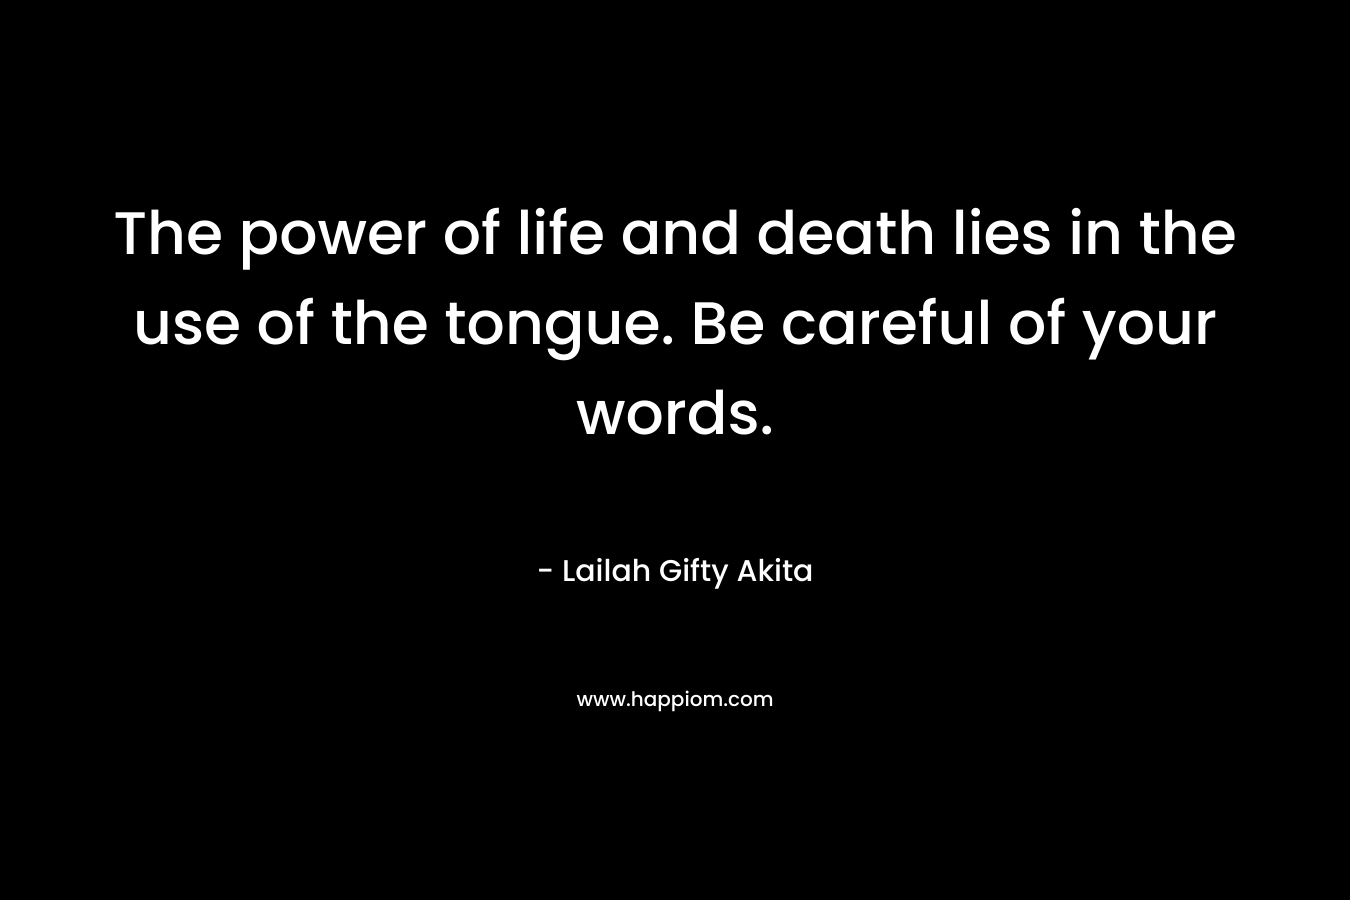 The power of life and death lies in the use of the tongue. Be careful of your words.